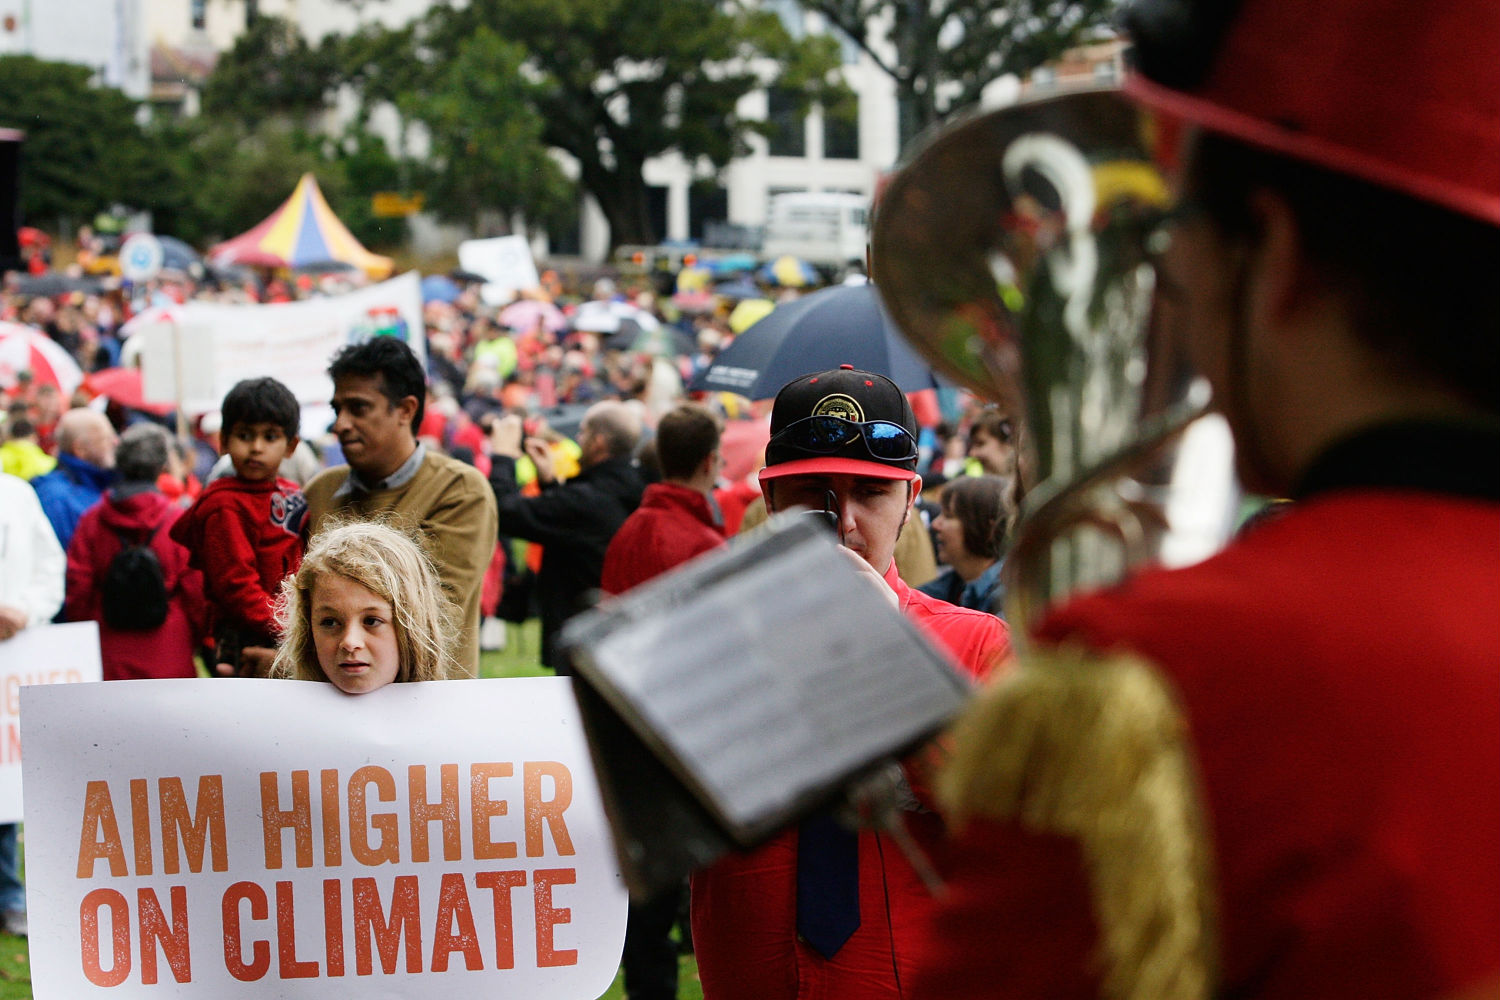 "Global warming" may be a more engaging term for activists than "climate change" (Photo by Lisa Maree Williams/Getty Images)